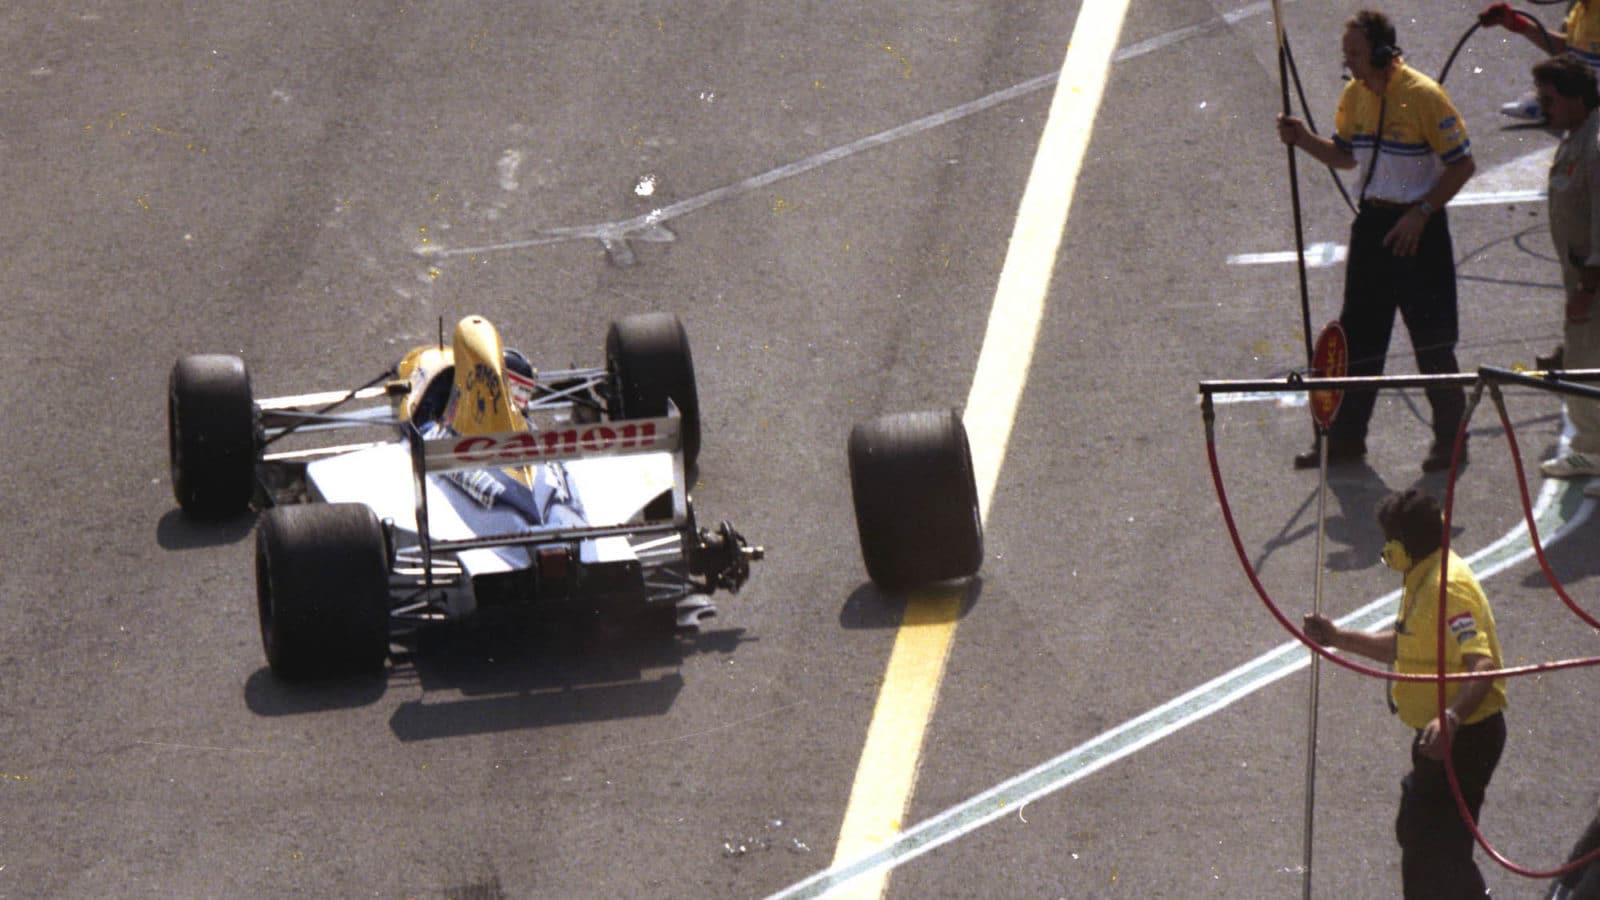 Wheel falls off Williams of Nigel Mansell at the 1991 Portuguese GP